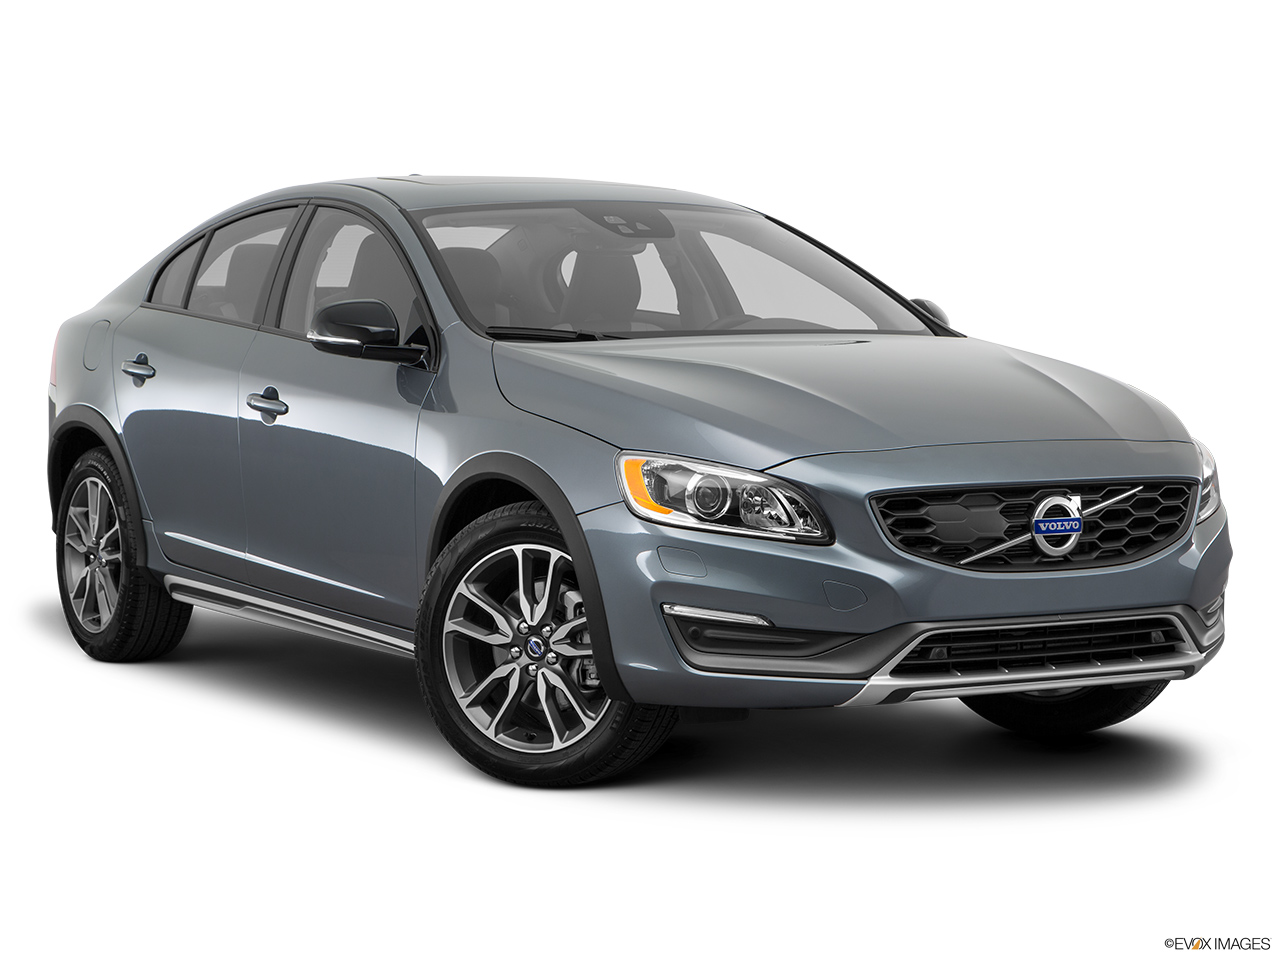 2016 Volvo S60 Cross Country T5 AWD Front passenger 3/4 w/ wheels turned. 